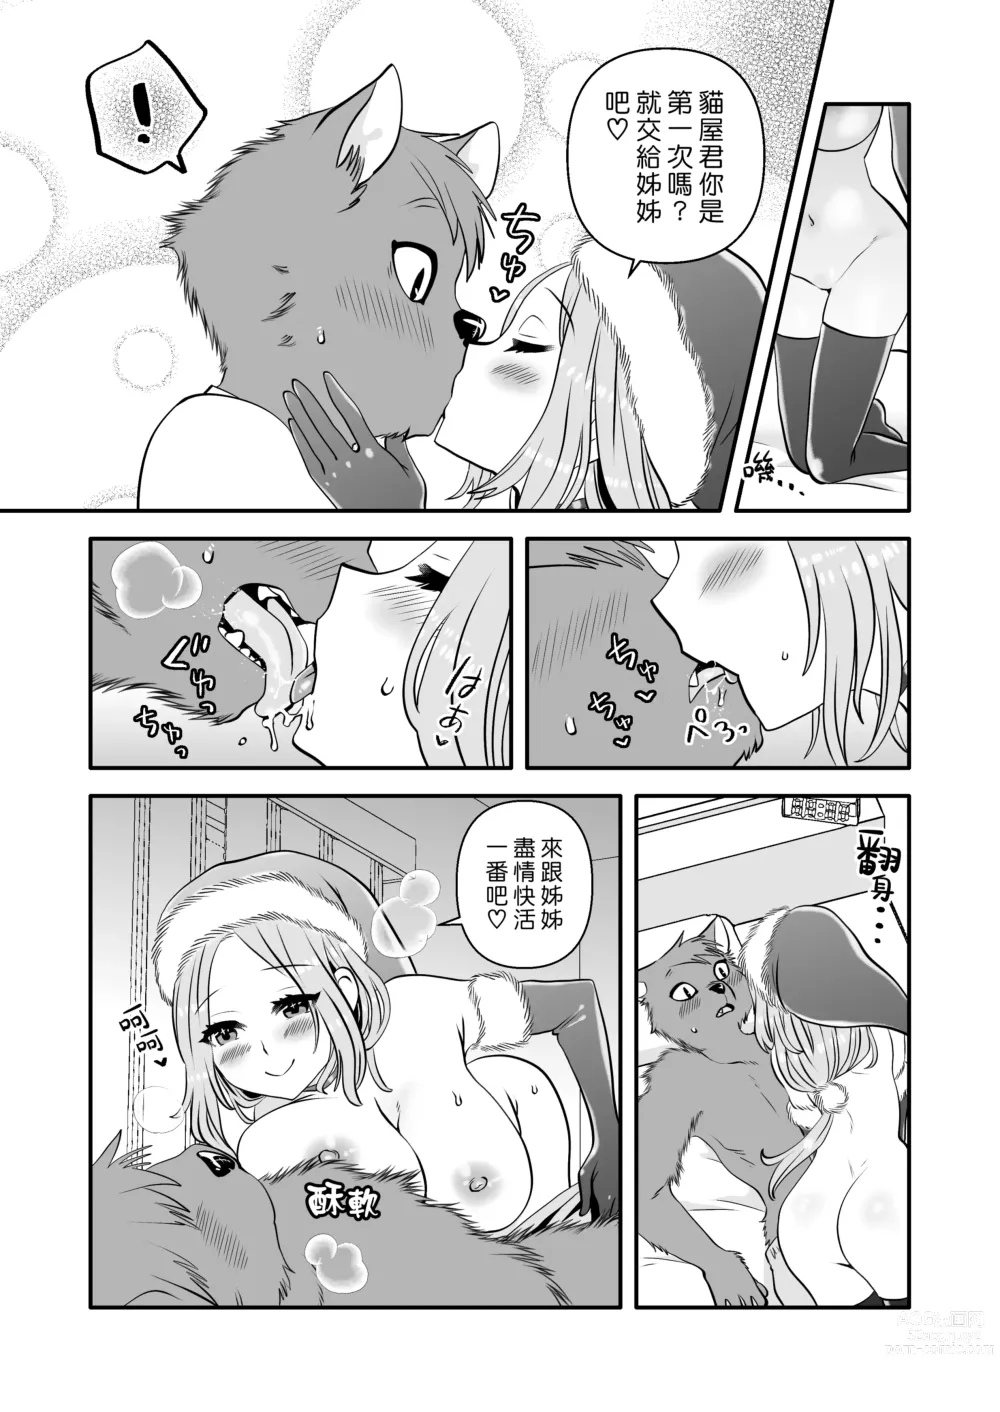 Page 10 of doujinshi 獸人君與聖誕大姊姊